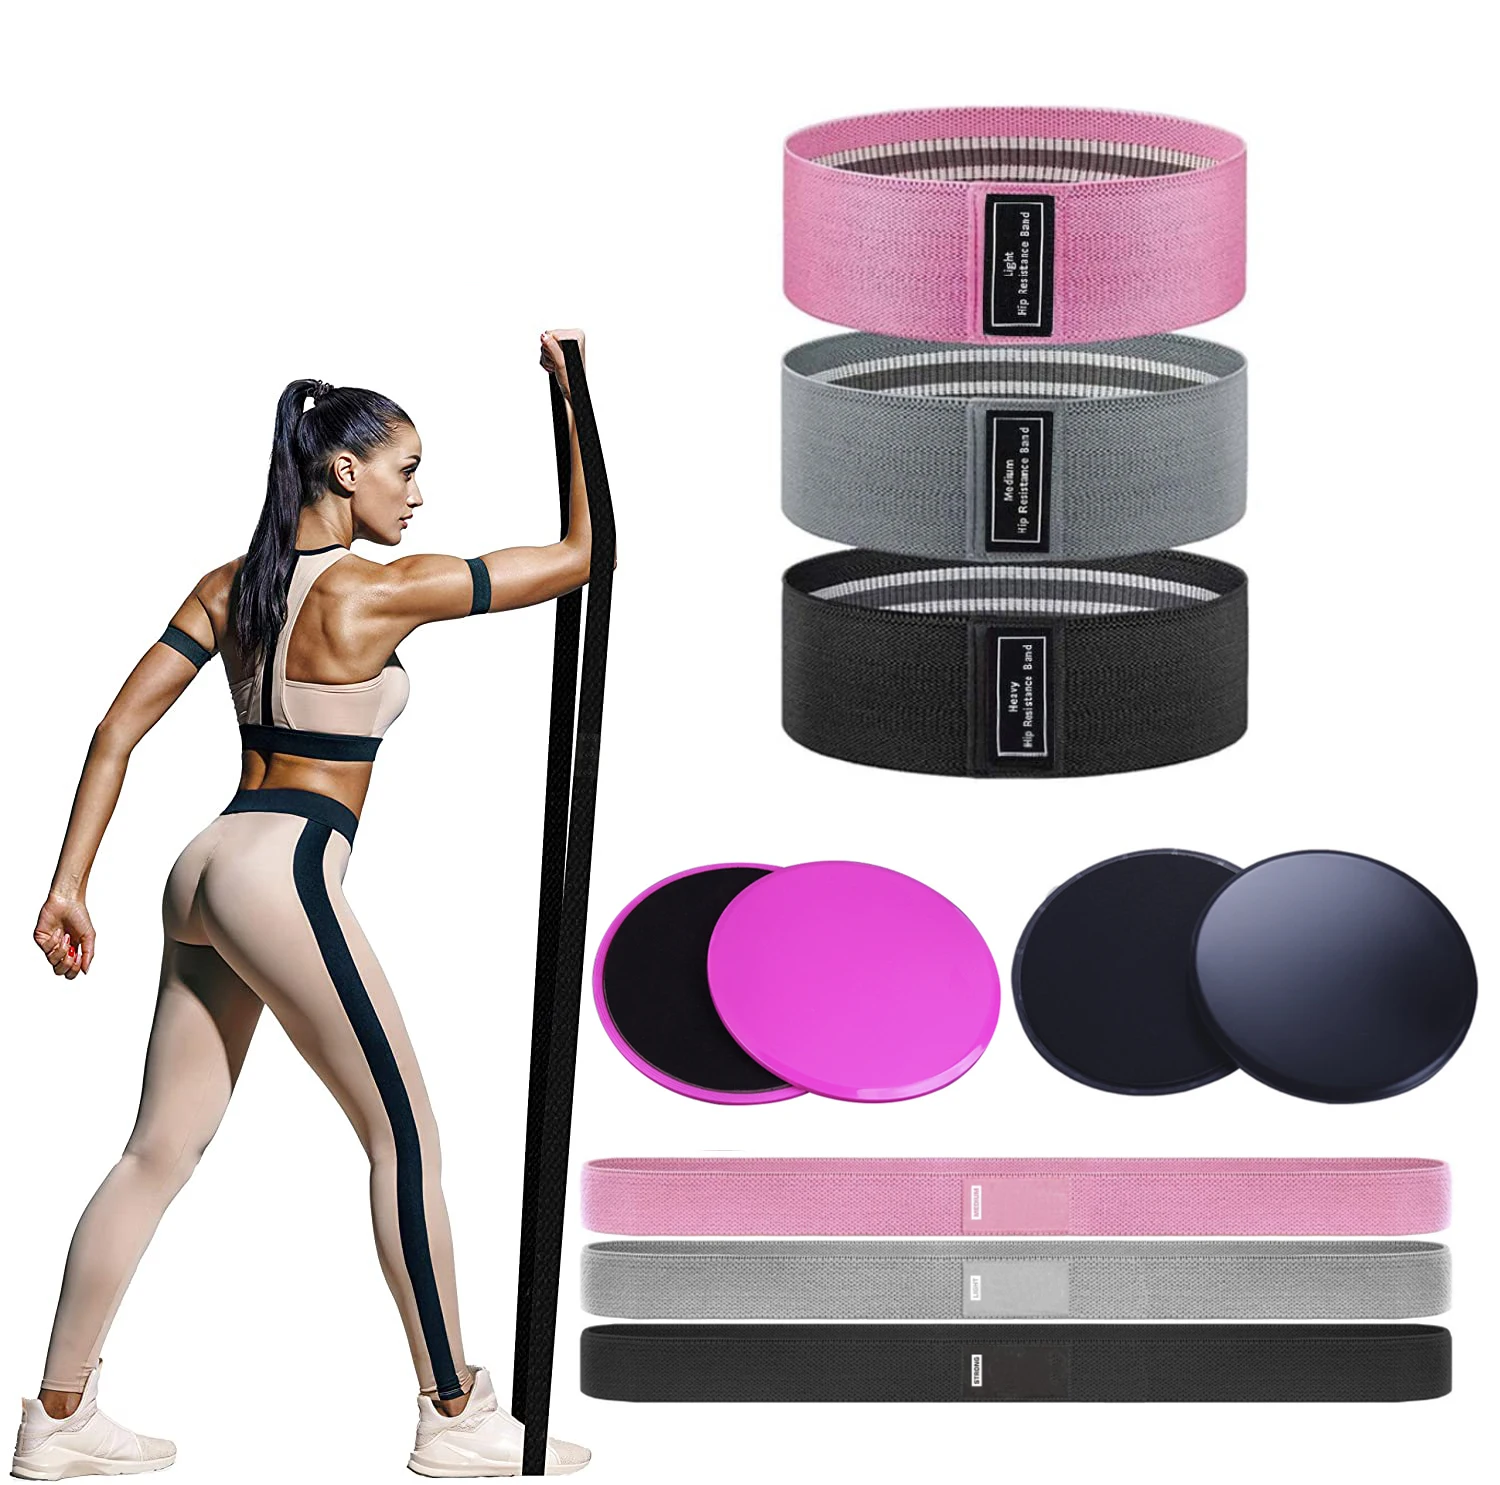 

Custom Logo Long Fabric Resistance Bands for Strength Training, Non-Slip Stretchy Gym Workout Bands Gliding Discs Set Packing, 3 colors for choose